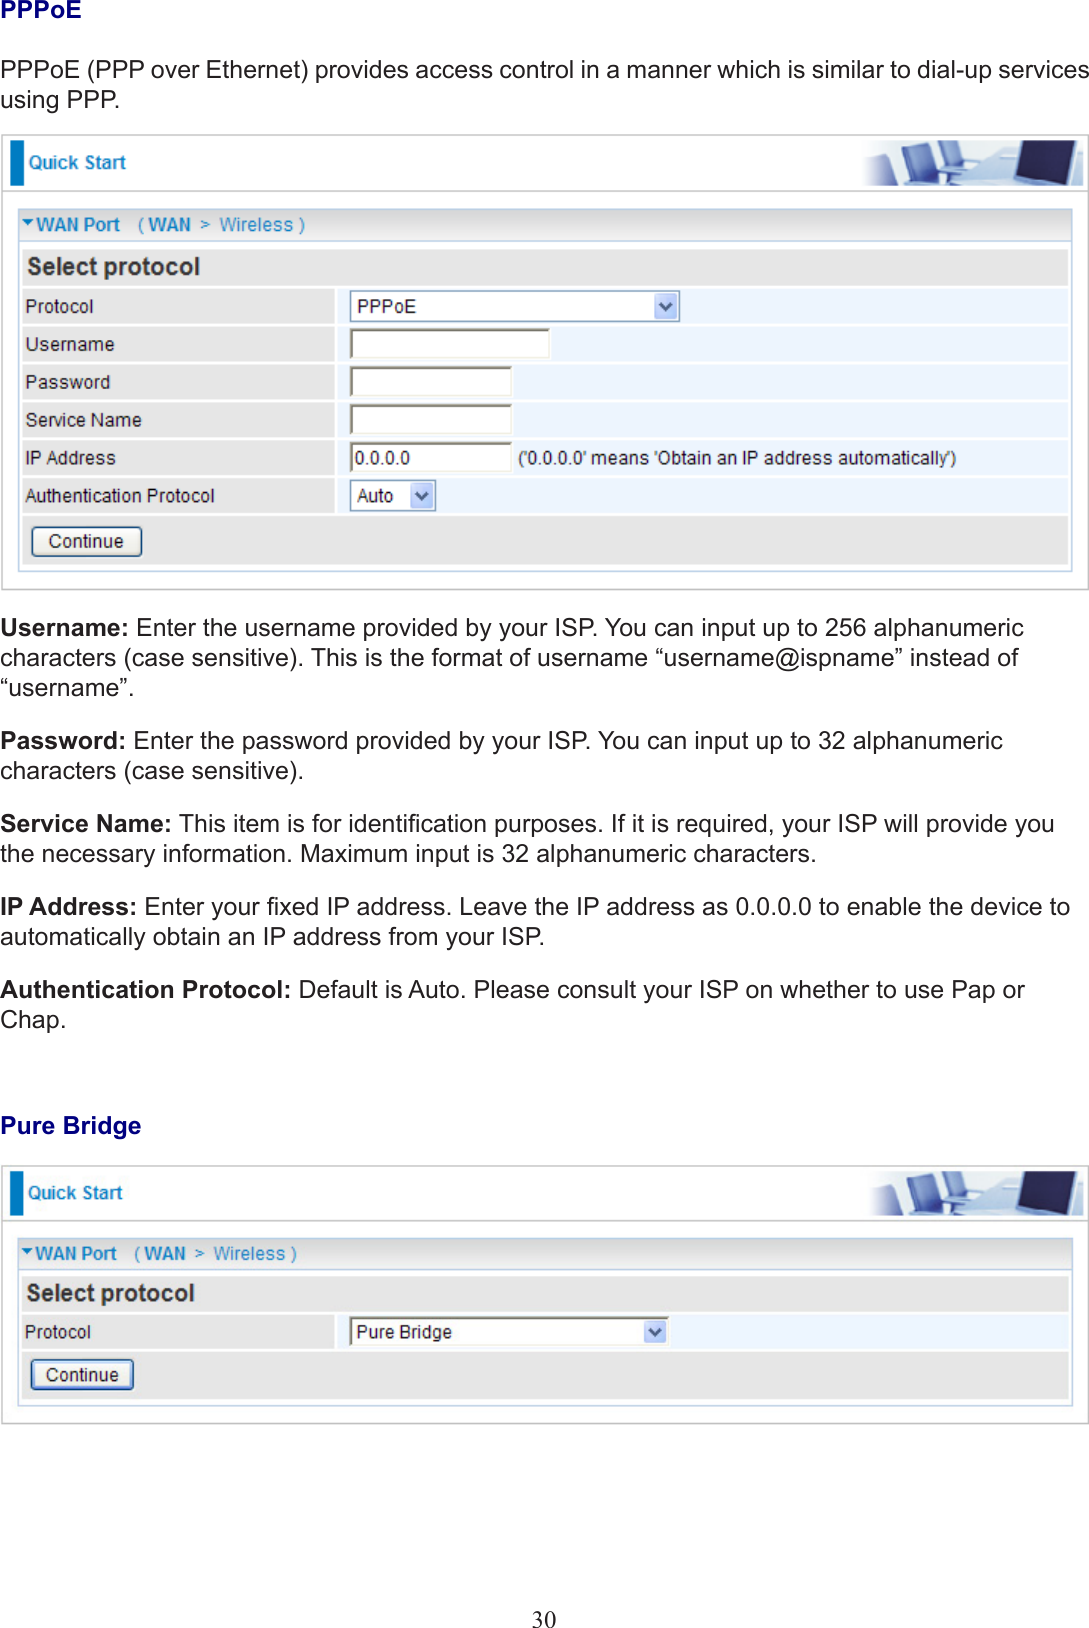 PPPoEPPPoE (PPP over Ethernet) provides access control in a manner which is similar to dial-up services using PPP.Username: Enter the username provided by your ISP. You can input up to 256 alphanumeric characters (case sensitive). This is the format of username “username@ispname” instead of “username”.Password: Enter the password provided by your ISP. You can input up to 32 alphanumeric characters (case sensitive).Service Name: This item is for identication purposes. If it is required, your ISP will provide you the necessary information. Maximum input is 32 alphanumeric characters.IP Address: Enter your xed IP address. Leave the IP address as 0.0.0.0 to enable the device to automatically obtain an IP address from your ISP.Authentication Protocol: Default is Auto. Please consult your ISP on whether to use Pap or Chap.Pure Bridge30